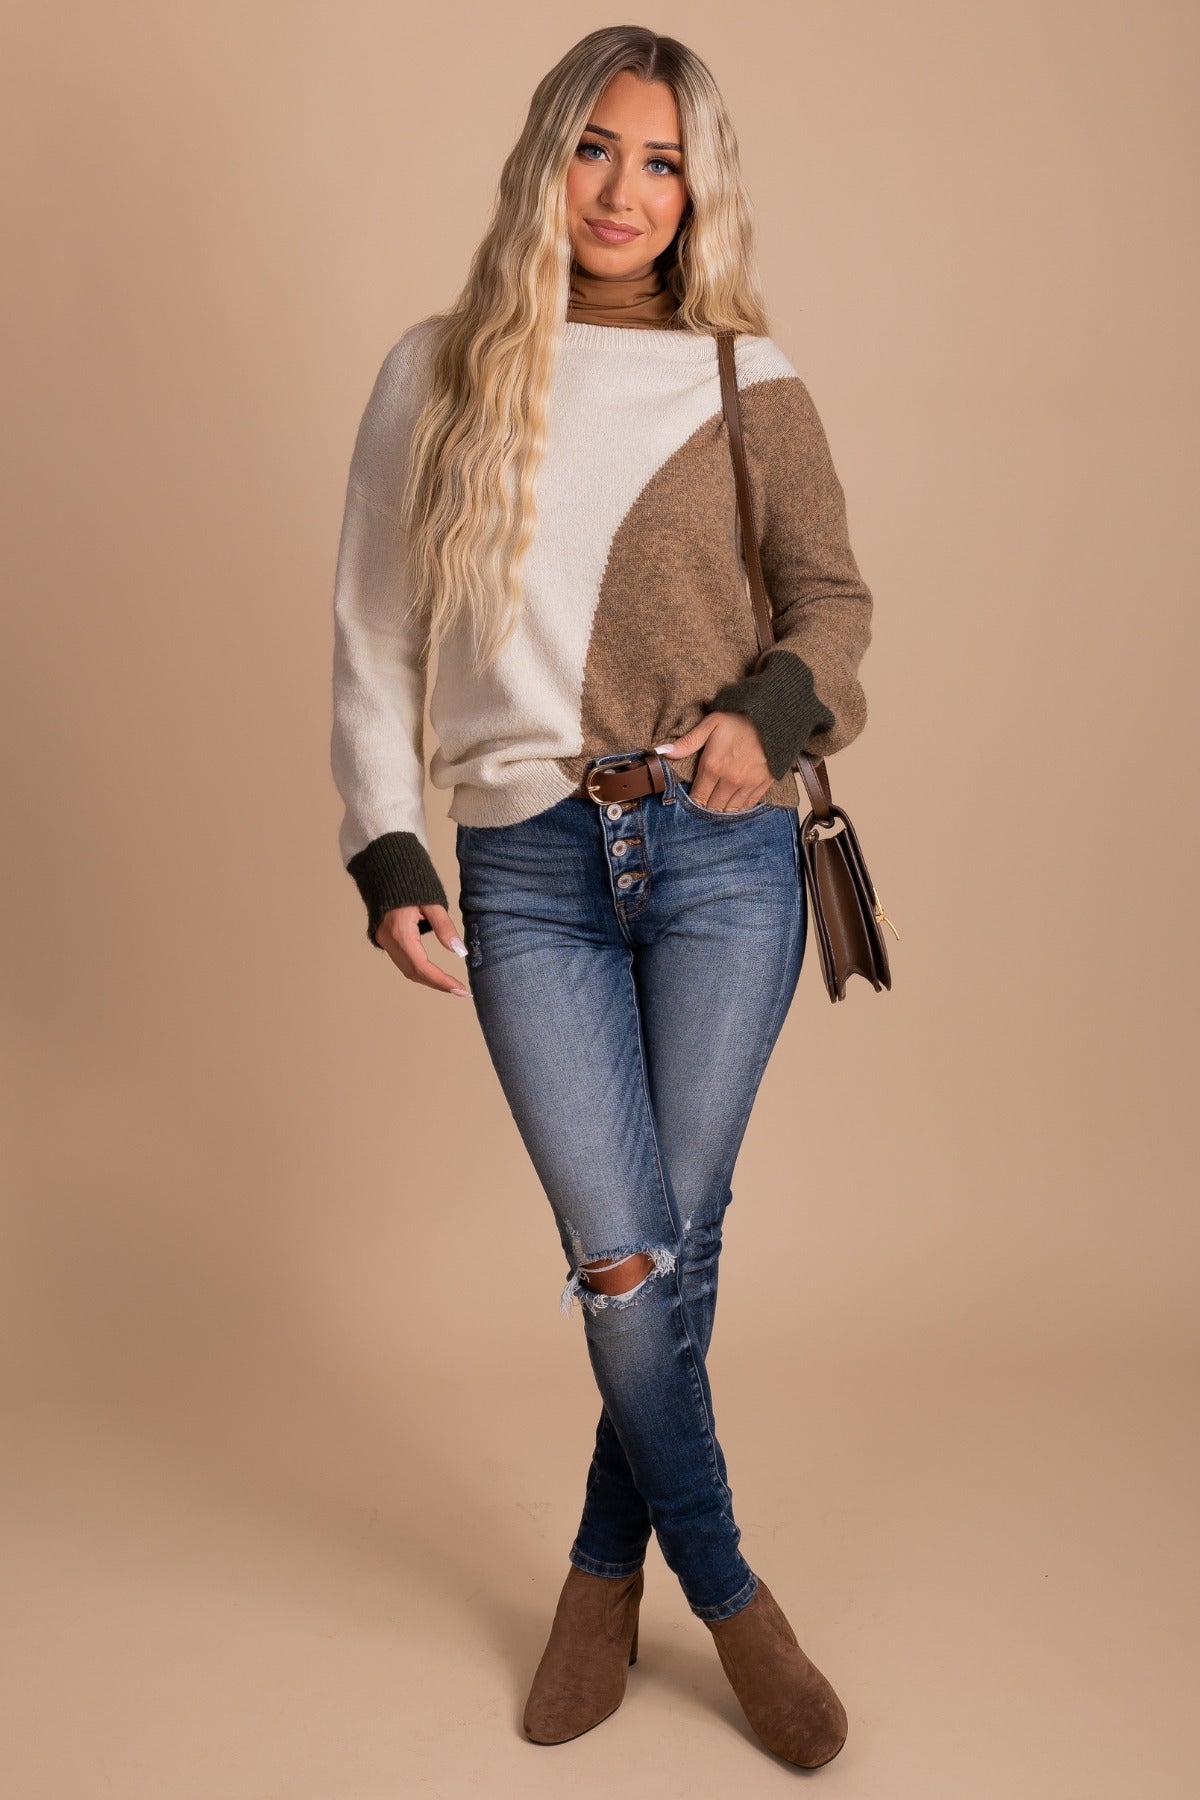 Oatmeal Off White, Brown, and Olive Dark Green Sweater for Fall